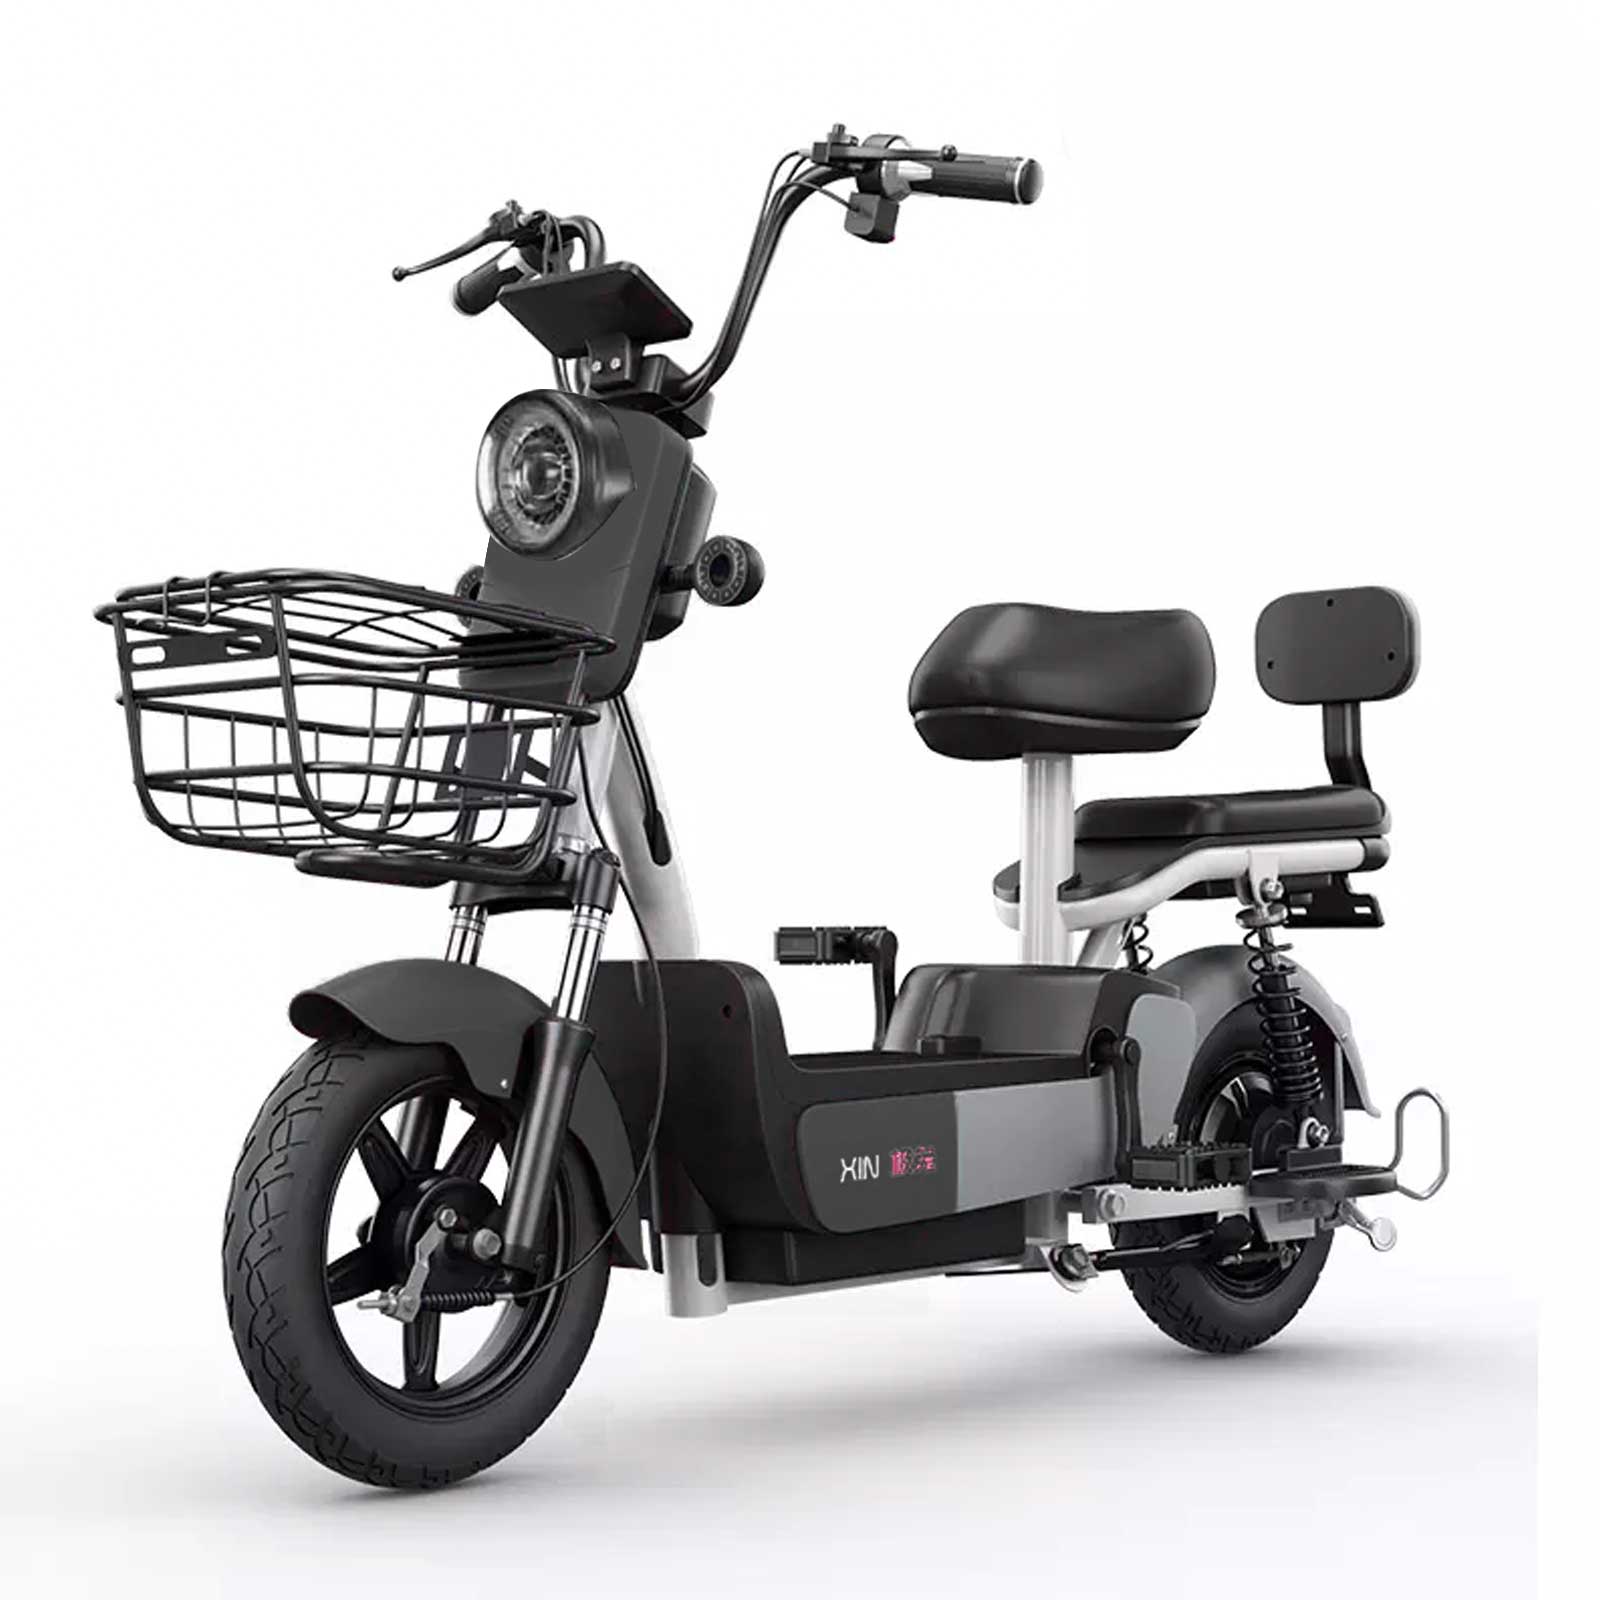 Electric moped 2 seater scooter 48v battery black grey